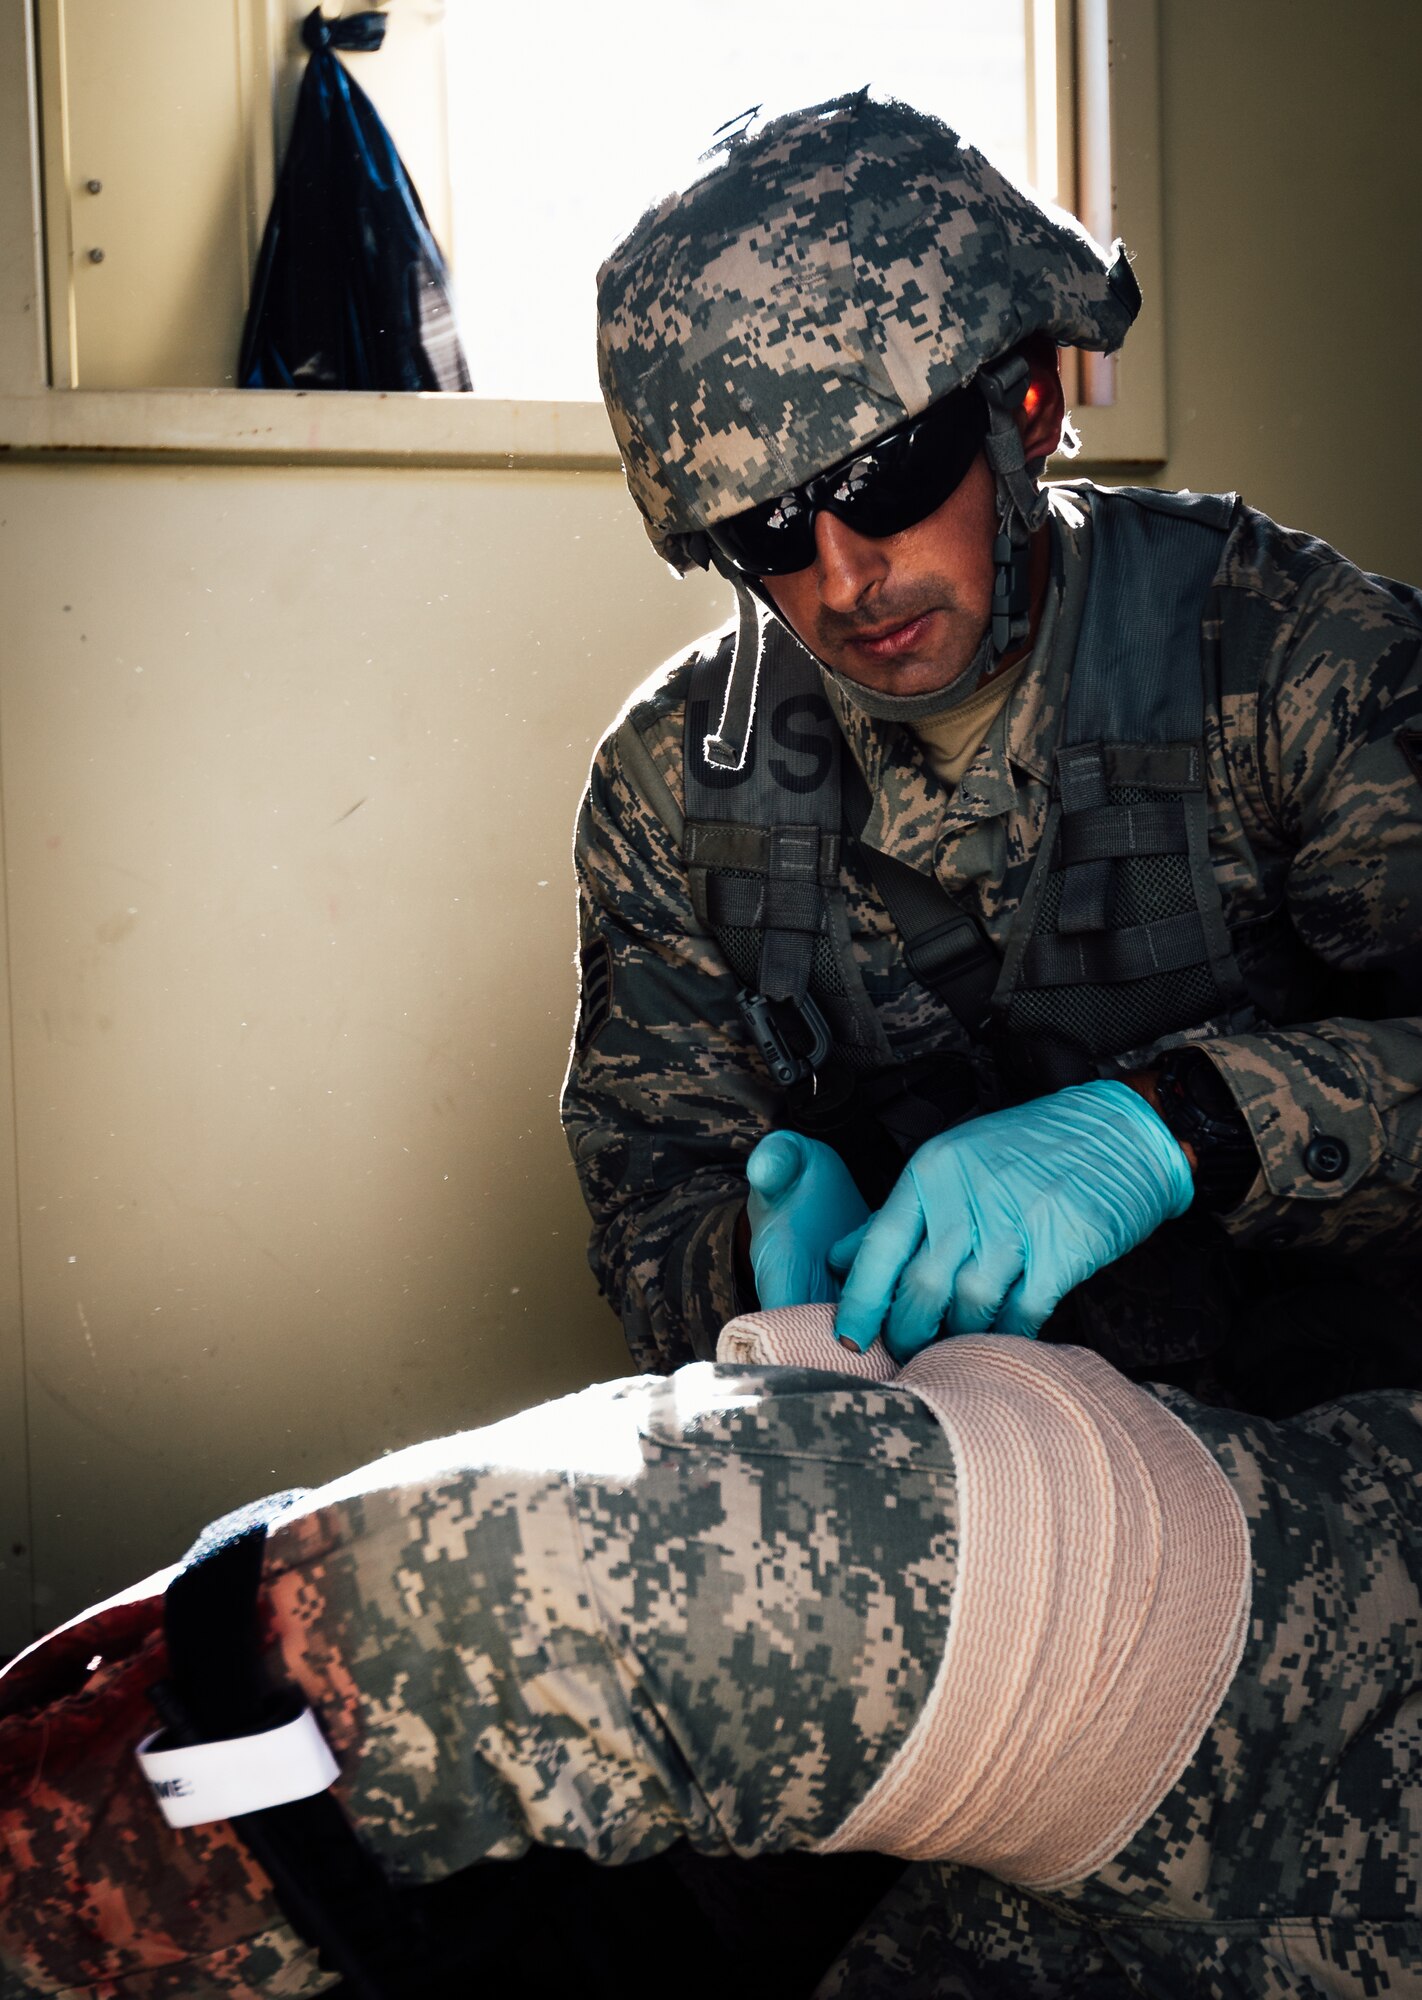 Staff Sgt. Remeet Singh, 446th Aeromedical Staging Squadron Expert Field Medic Badge candidate, provides medical care to a simulated patient during the EFMB course at Joint Base Lewis-McChord, Wash., Sept. 24, 2015. The EFMB is the non-combat equivalent of the Combat Medical Badge and is awarded to medical personnel of the U.S. military who successfully complete a set of qualification tests. (U.S. Air Force photo by Senior Airman Jordan Castelan/Released)